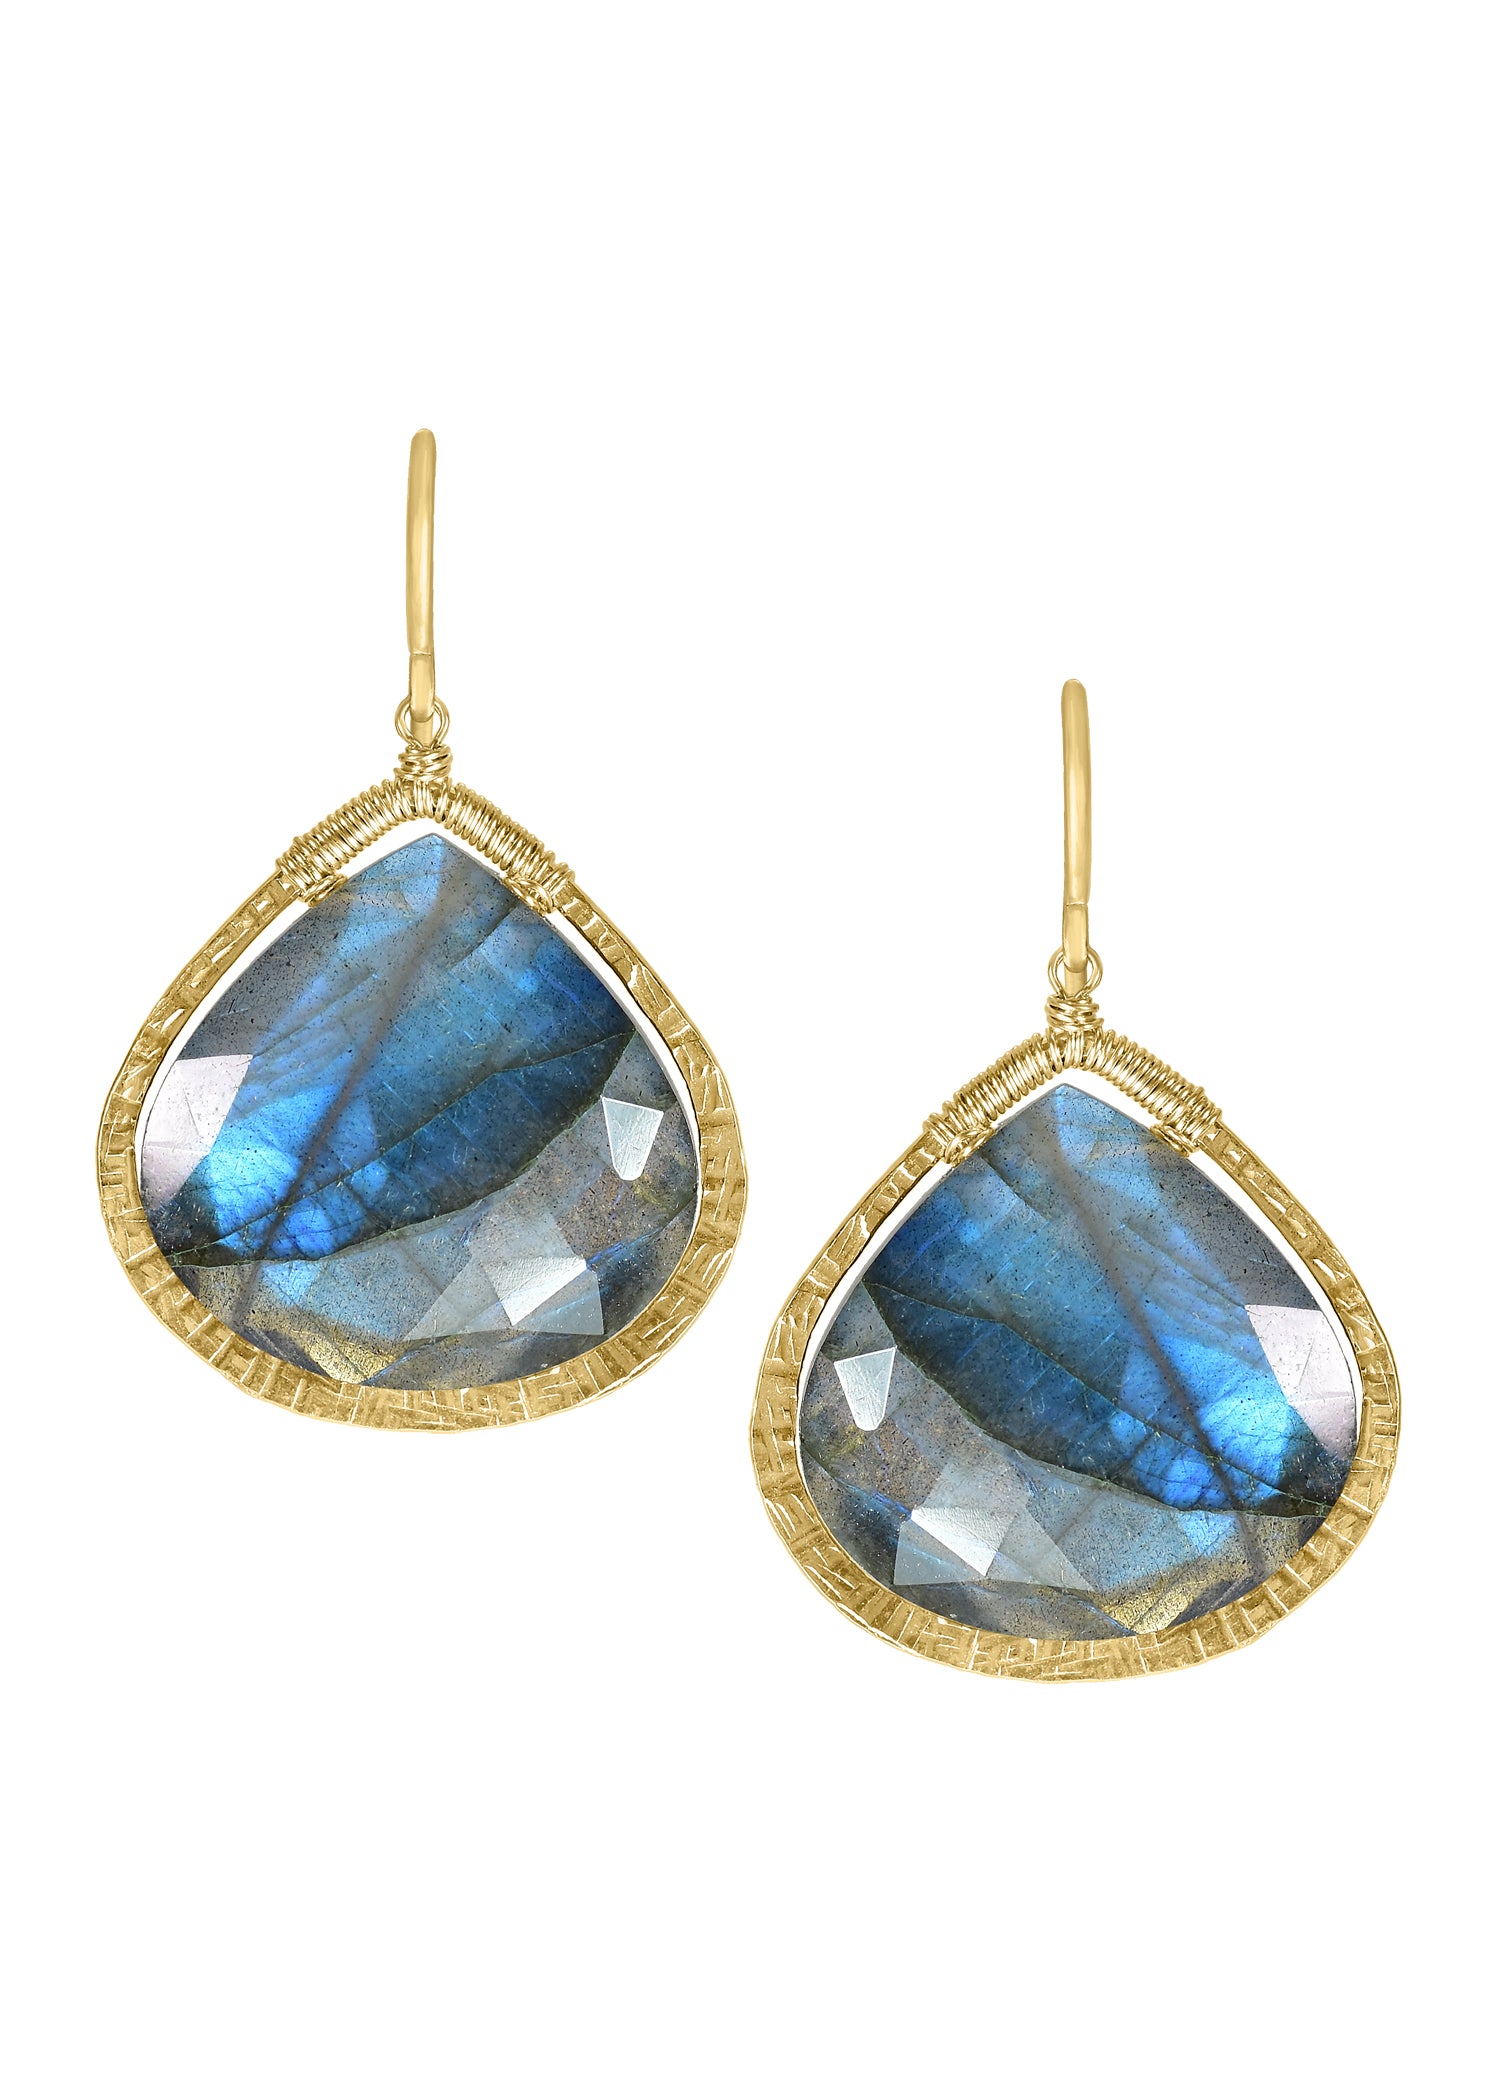 Labradorite 14k gold fill Earrings measure 1-3/8" in length (including the ear wires) and 7/8" in width at the widest point Handmade in our Los Angeles studio